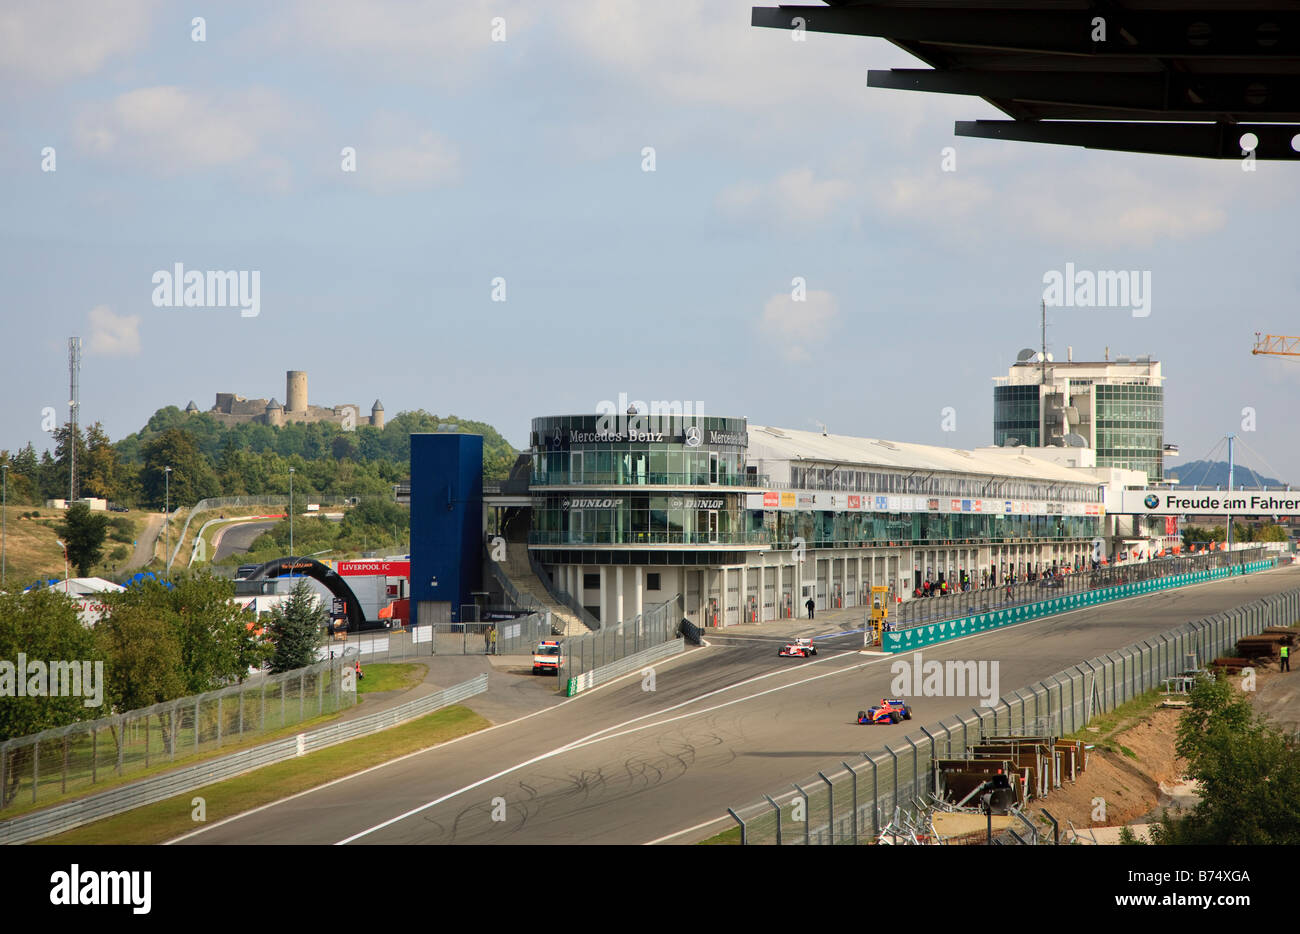 Pit lane and finish line of the Nürburgring racing track in Nürburg, Germany. Stock Photo